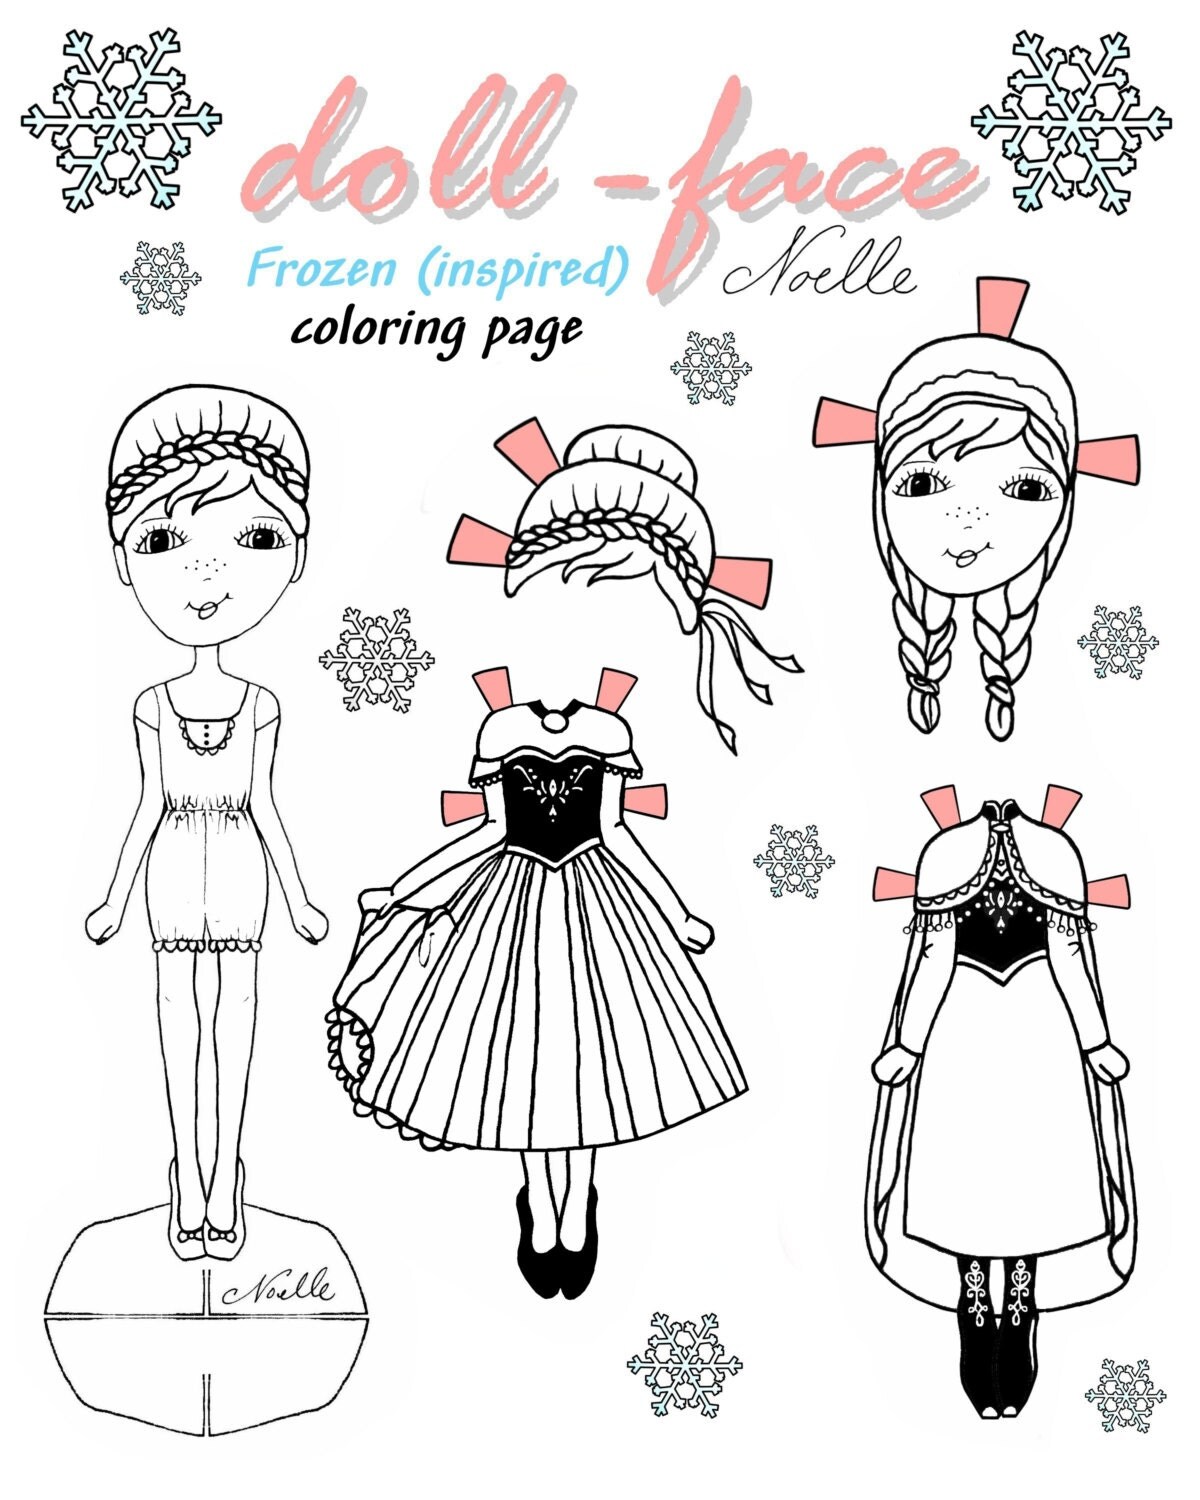 Disney's Frozen inspired Dollfac coloring page